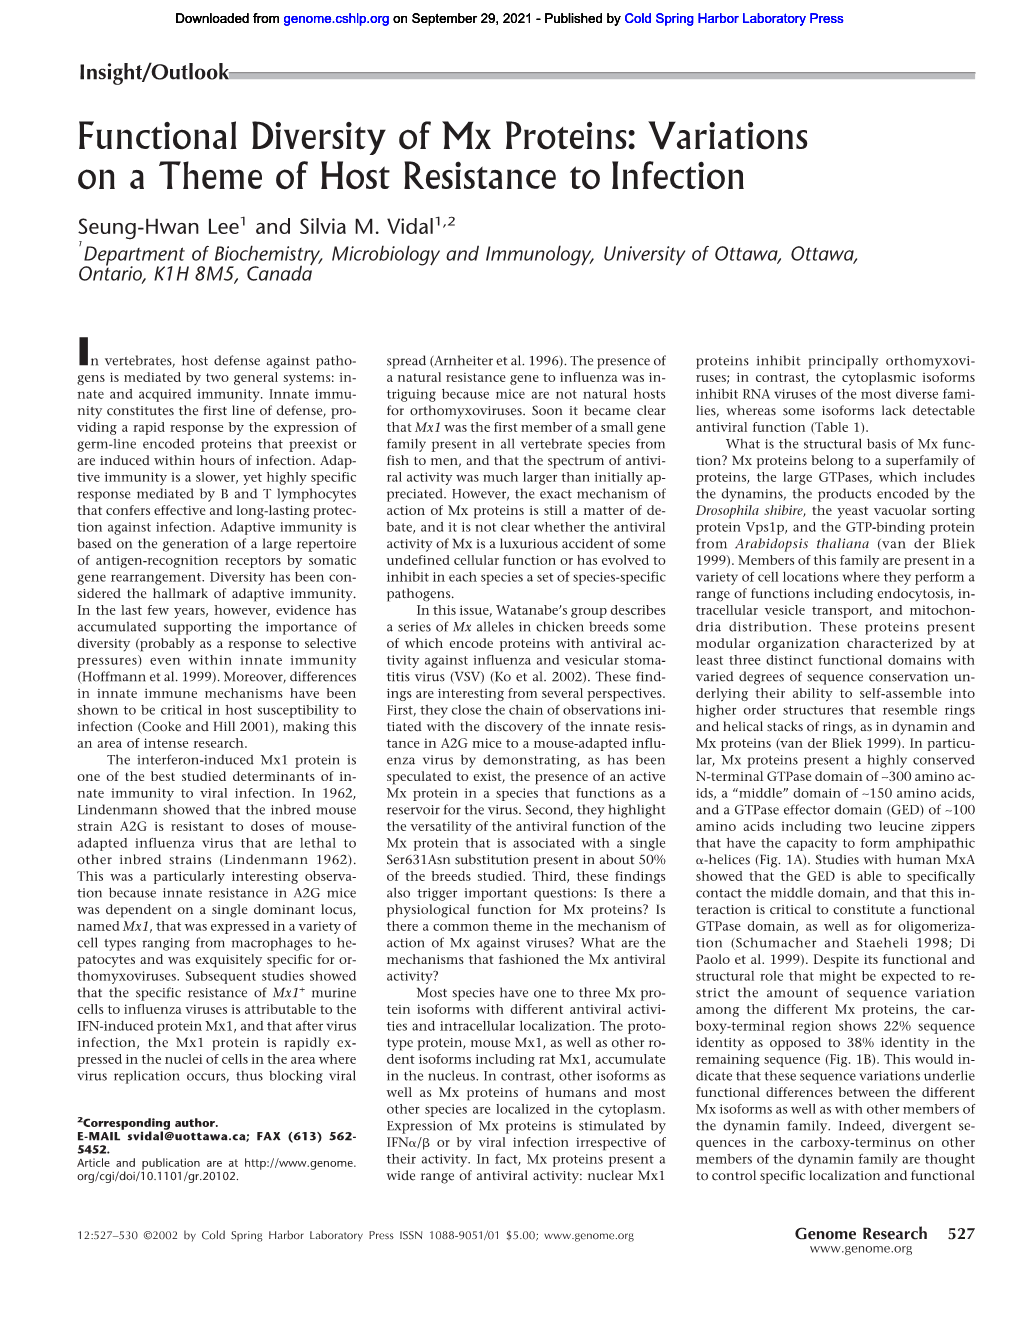 Functional Diversity of Mx Proteins: Variations on a Theme of Host Resistance to Infection